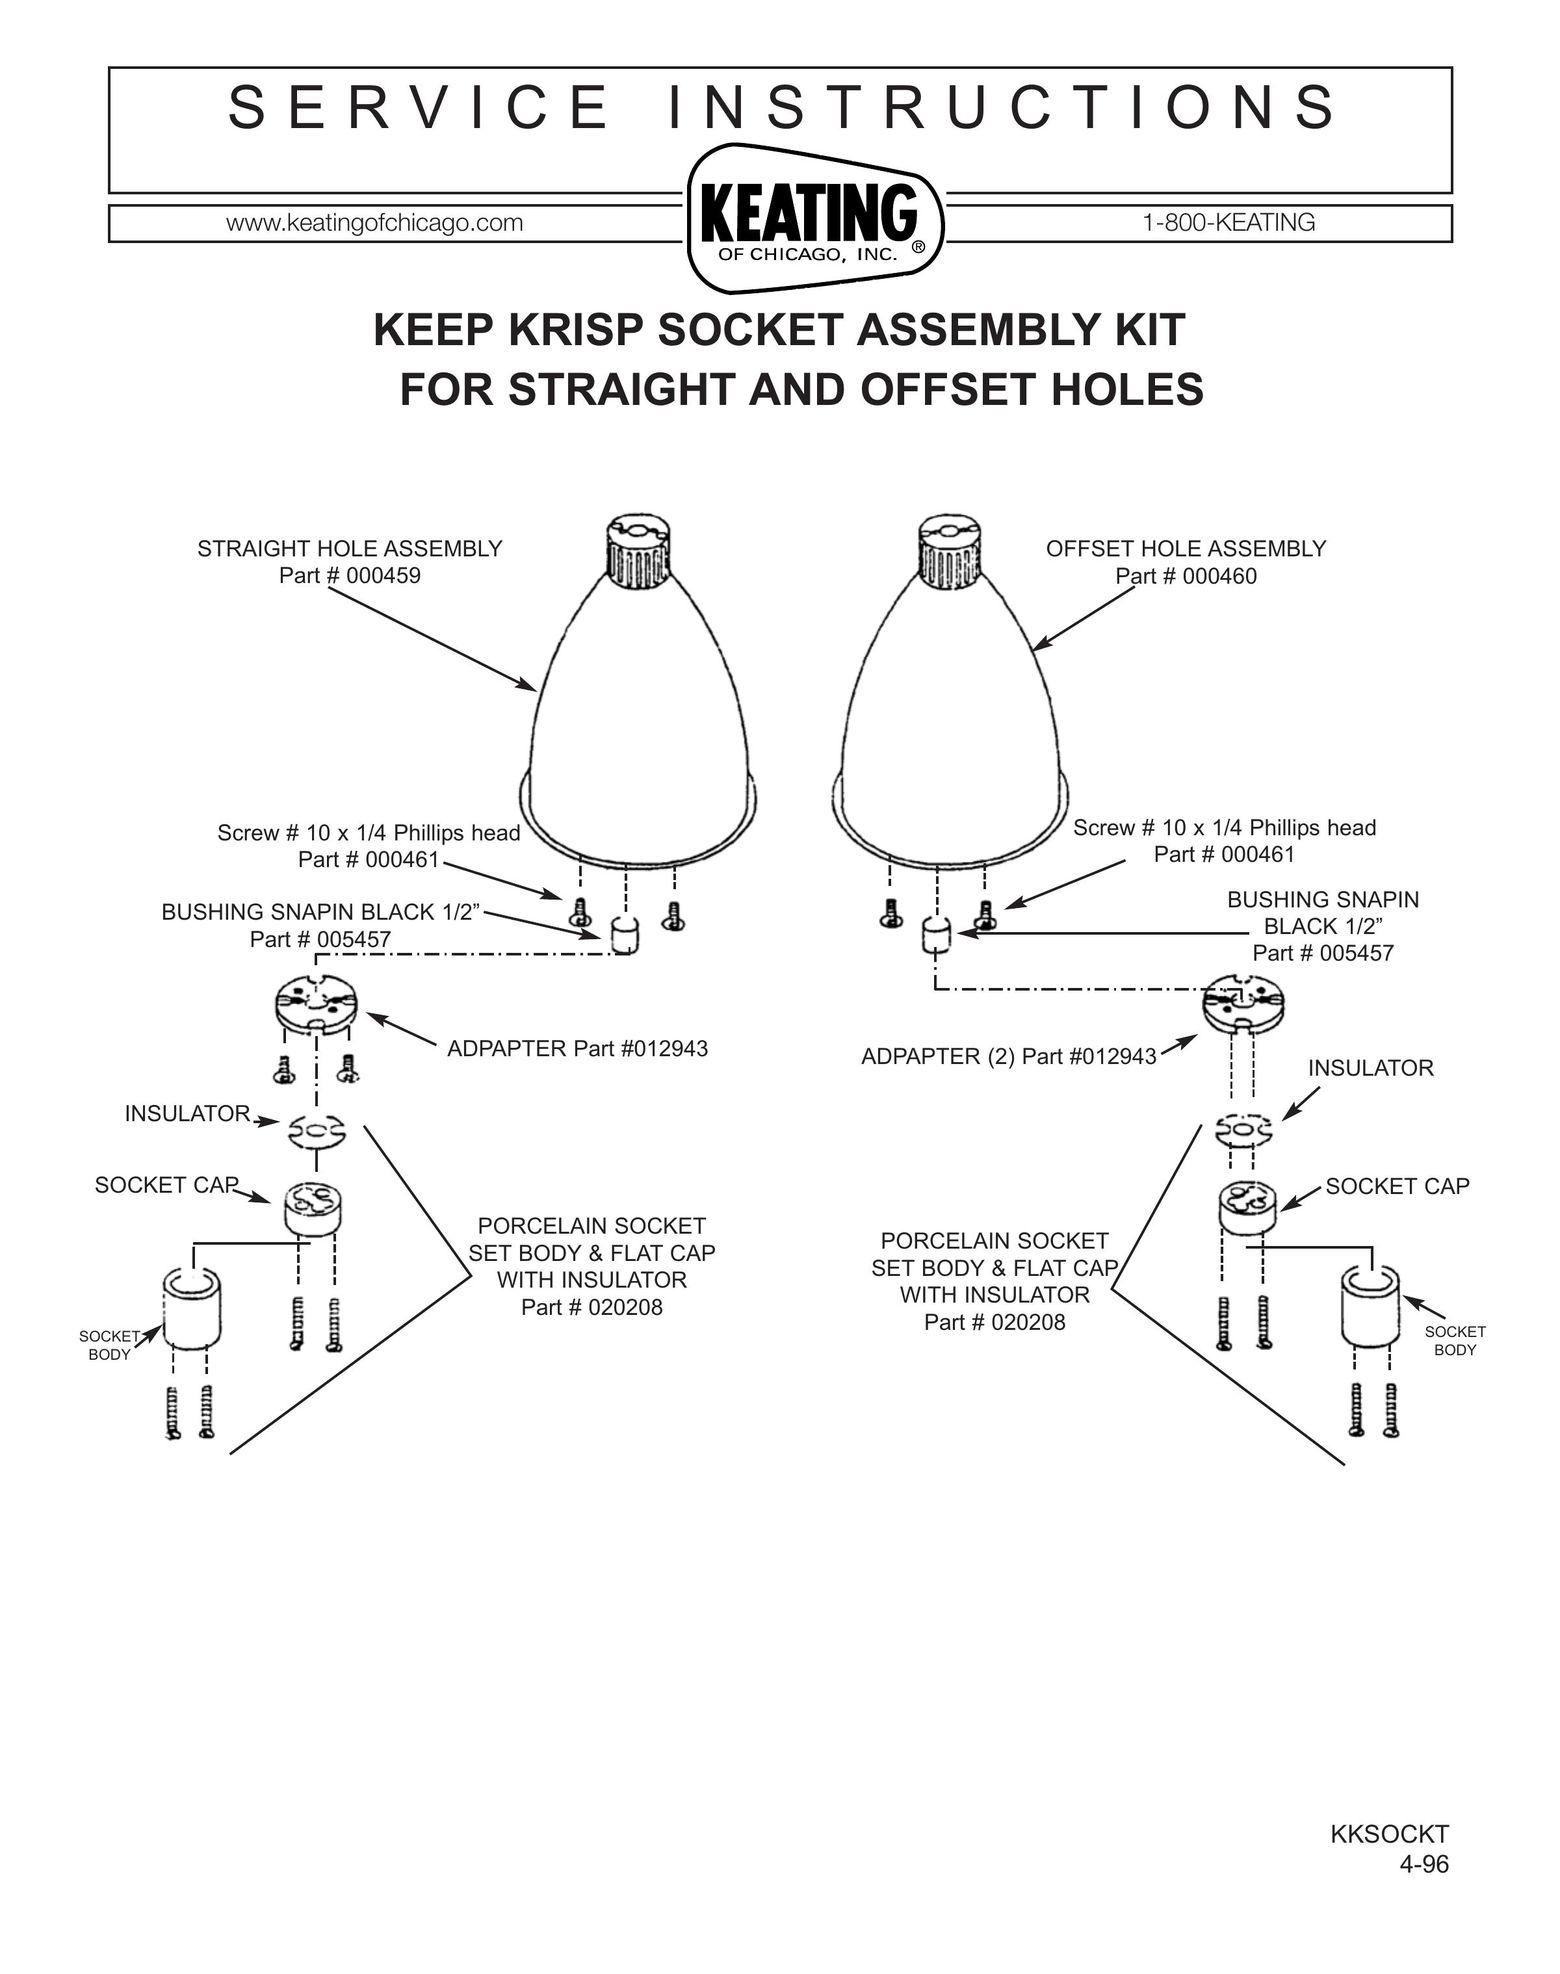 Keating Of Chicago Krisp Socket Assembly Kit For Straight and Offset Holes Indoor Furnishings User Manual